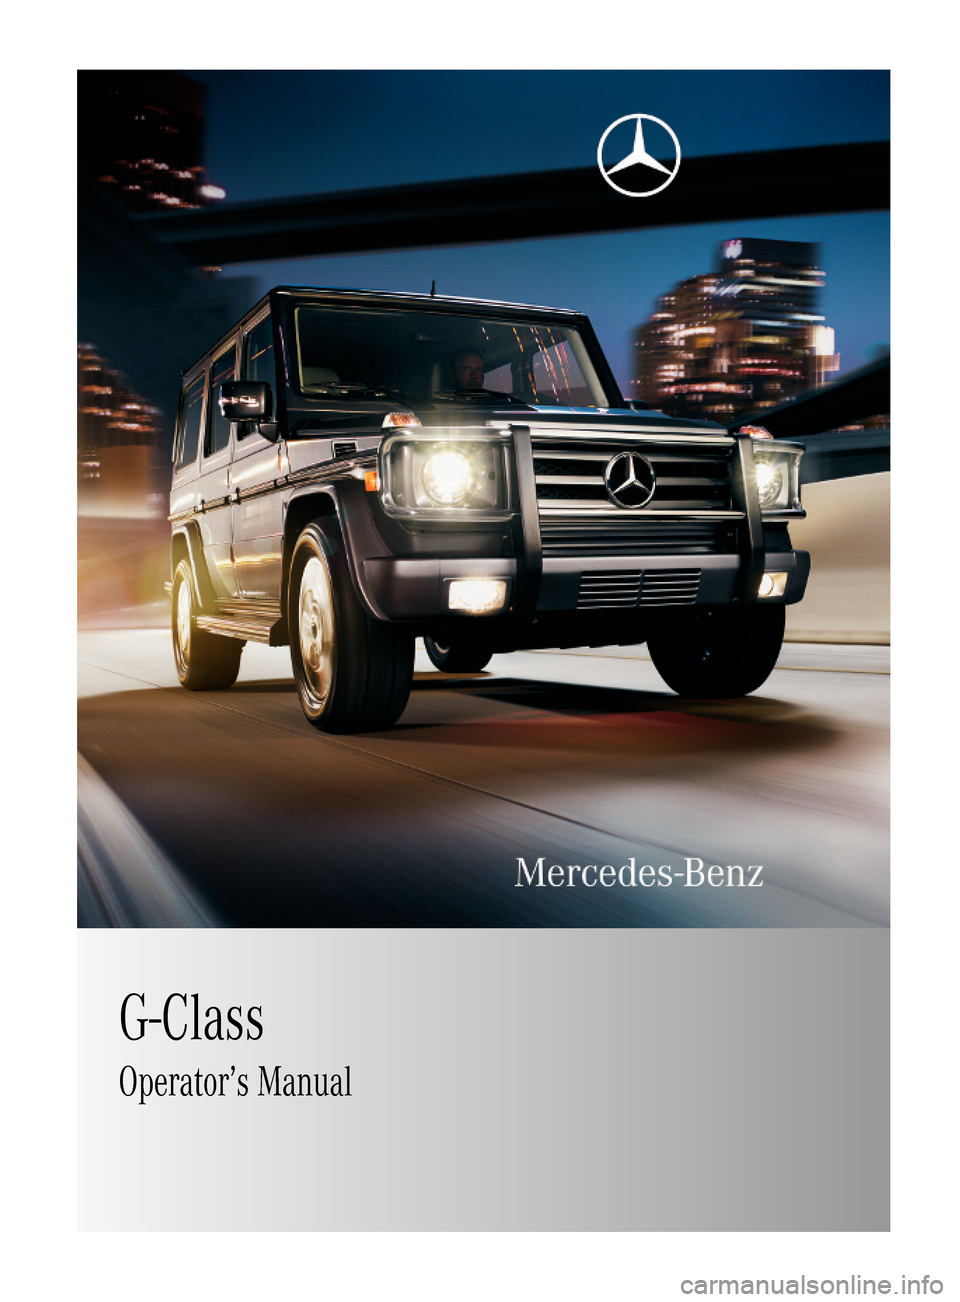 MERCEDES-BENZ G-Class 2009 W463 Owners Manual G-ClassOperator’s Manual463_AKB; 2; 52, en-USd2ureepe,Version: 2.11.7.12008-12-02T10:52:11+01:00 - Seite 1    